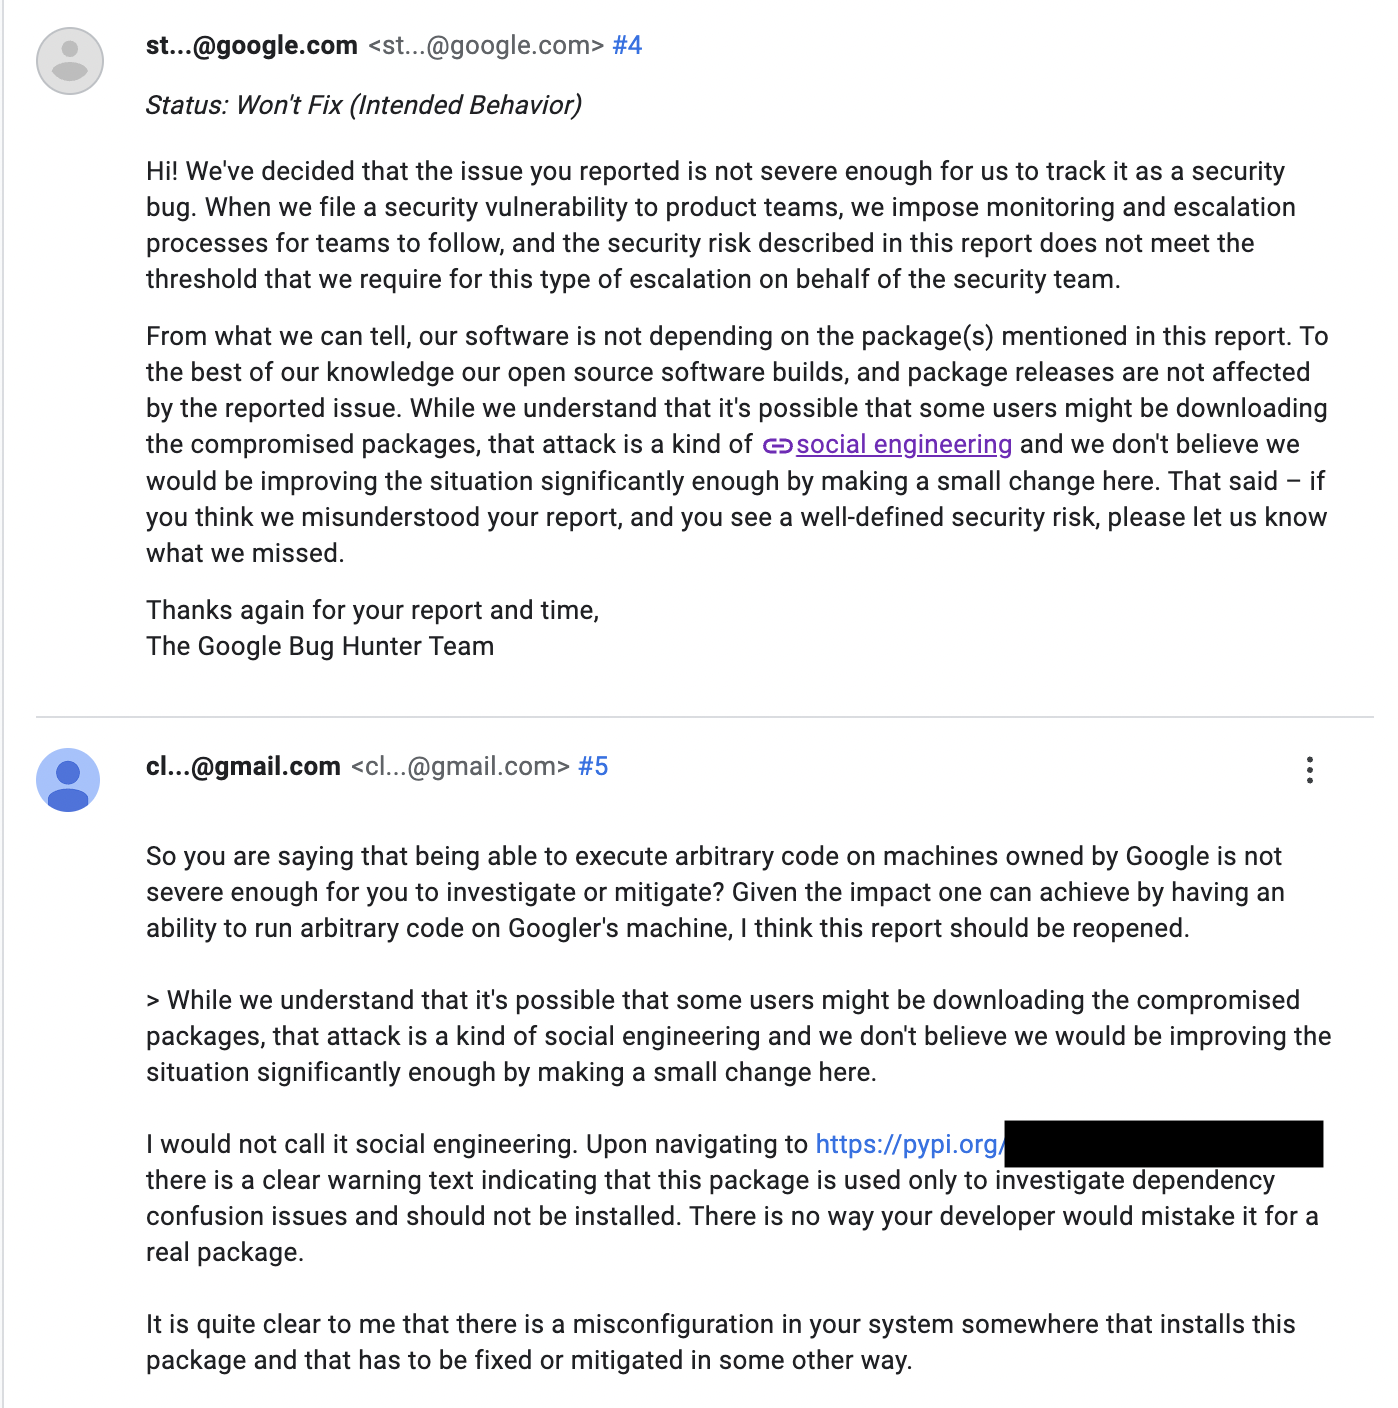 Screenshot of reply from Google after reporting the bug again